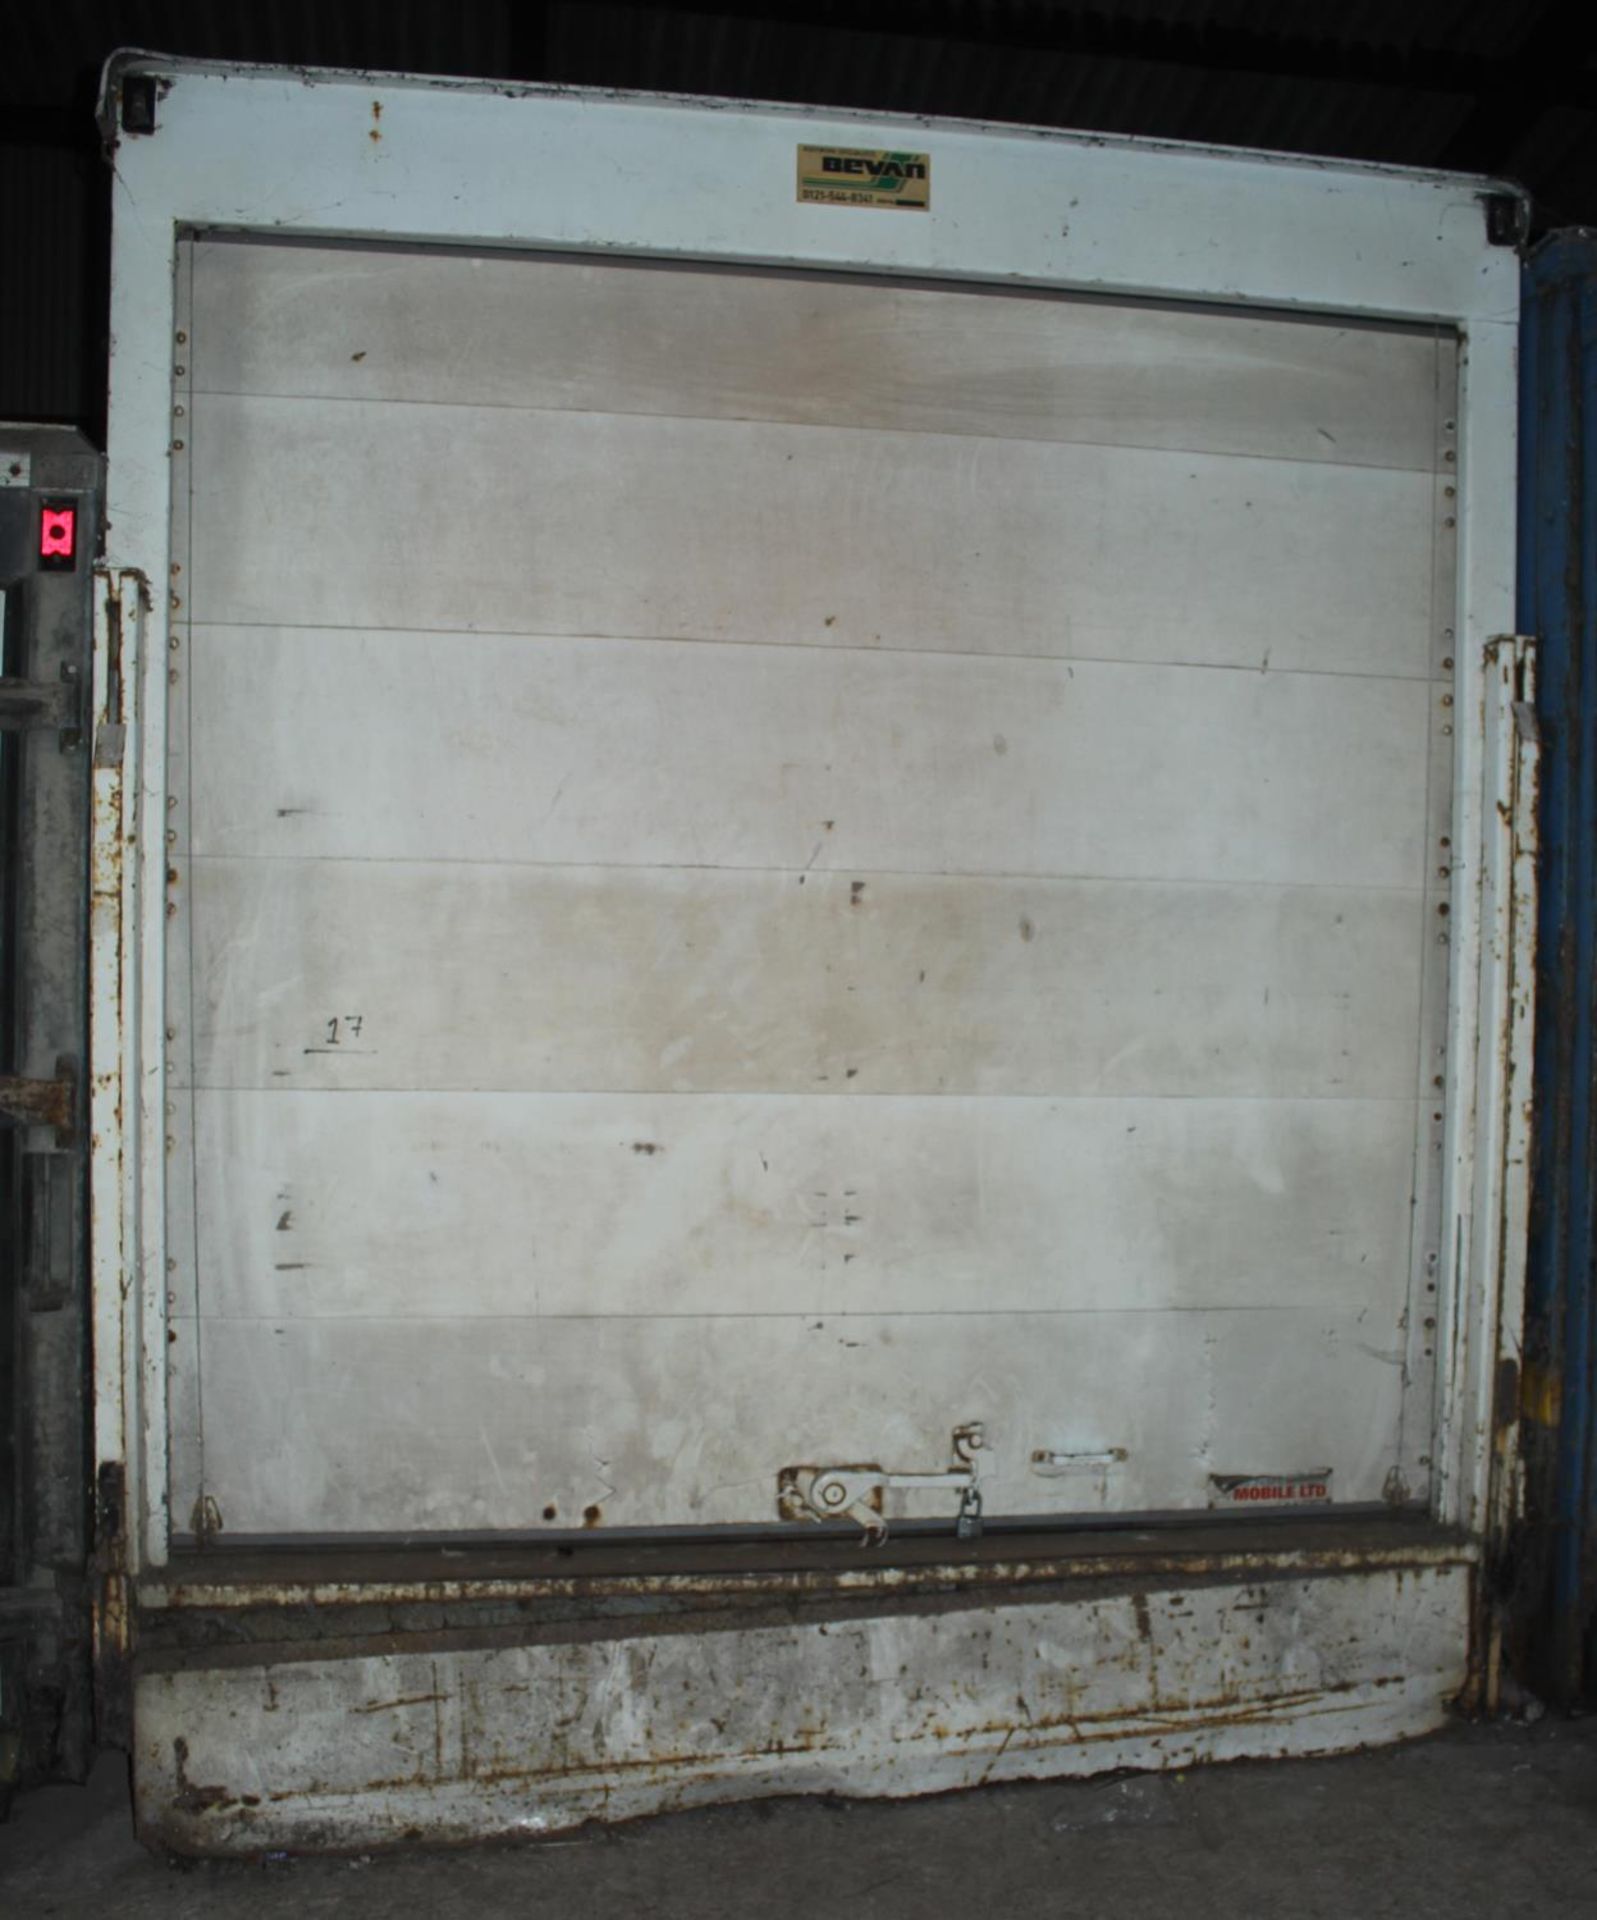 TWO LORRY BODIES 1X20' LONG 7'7 WIDE 7'7" HIGH 1X20'2" LONG 7'11" WIDE 3" WIDE (BARN DOORS) STORED